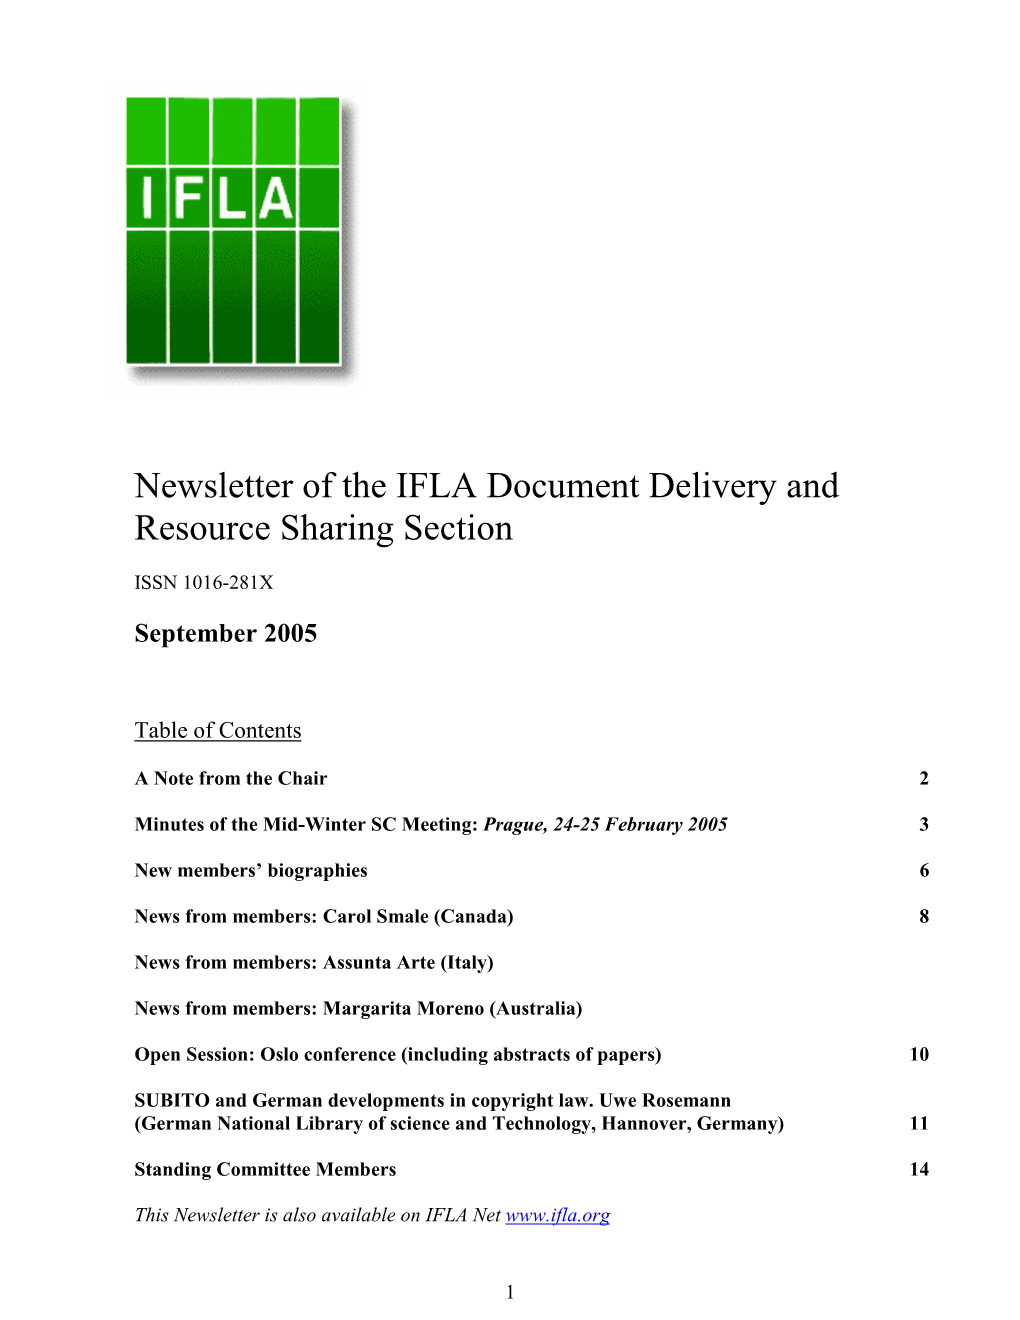 Newsletter of the IFLA Document Delivery and Resource Sharing Section